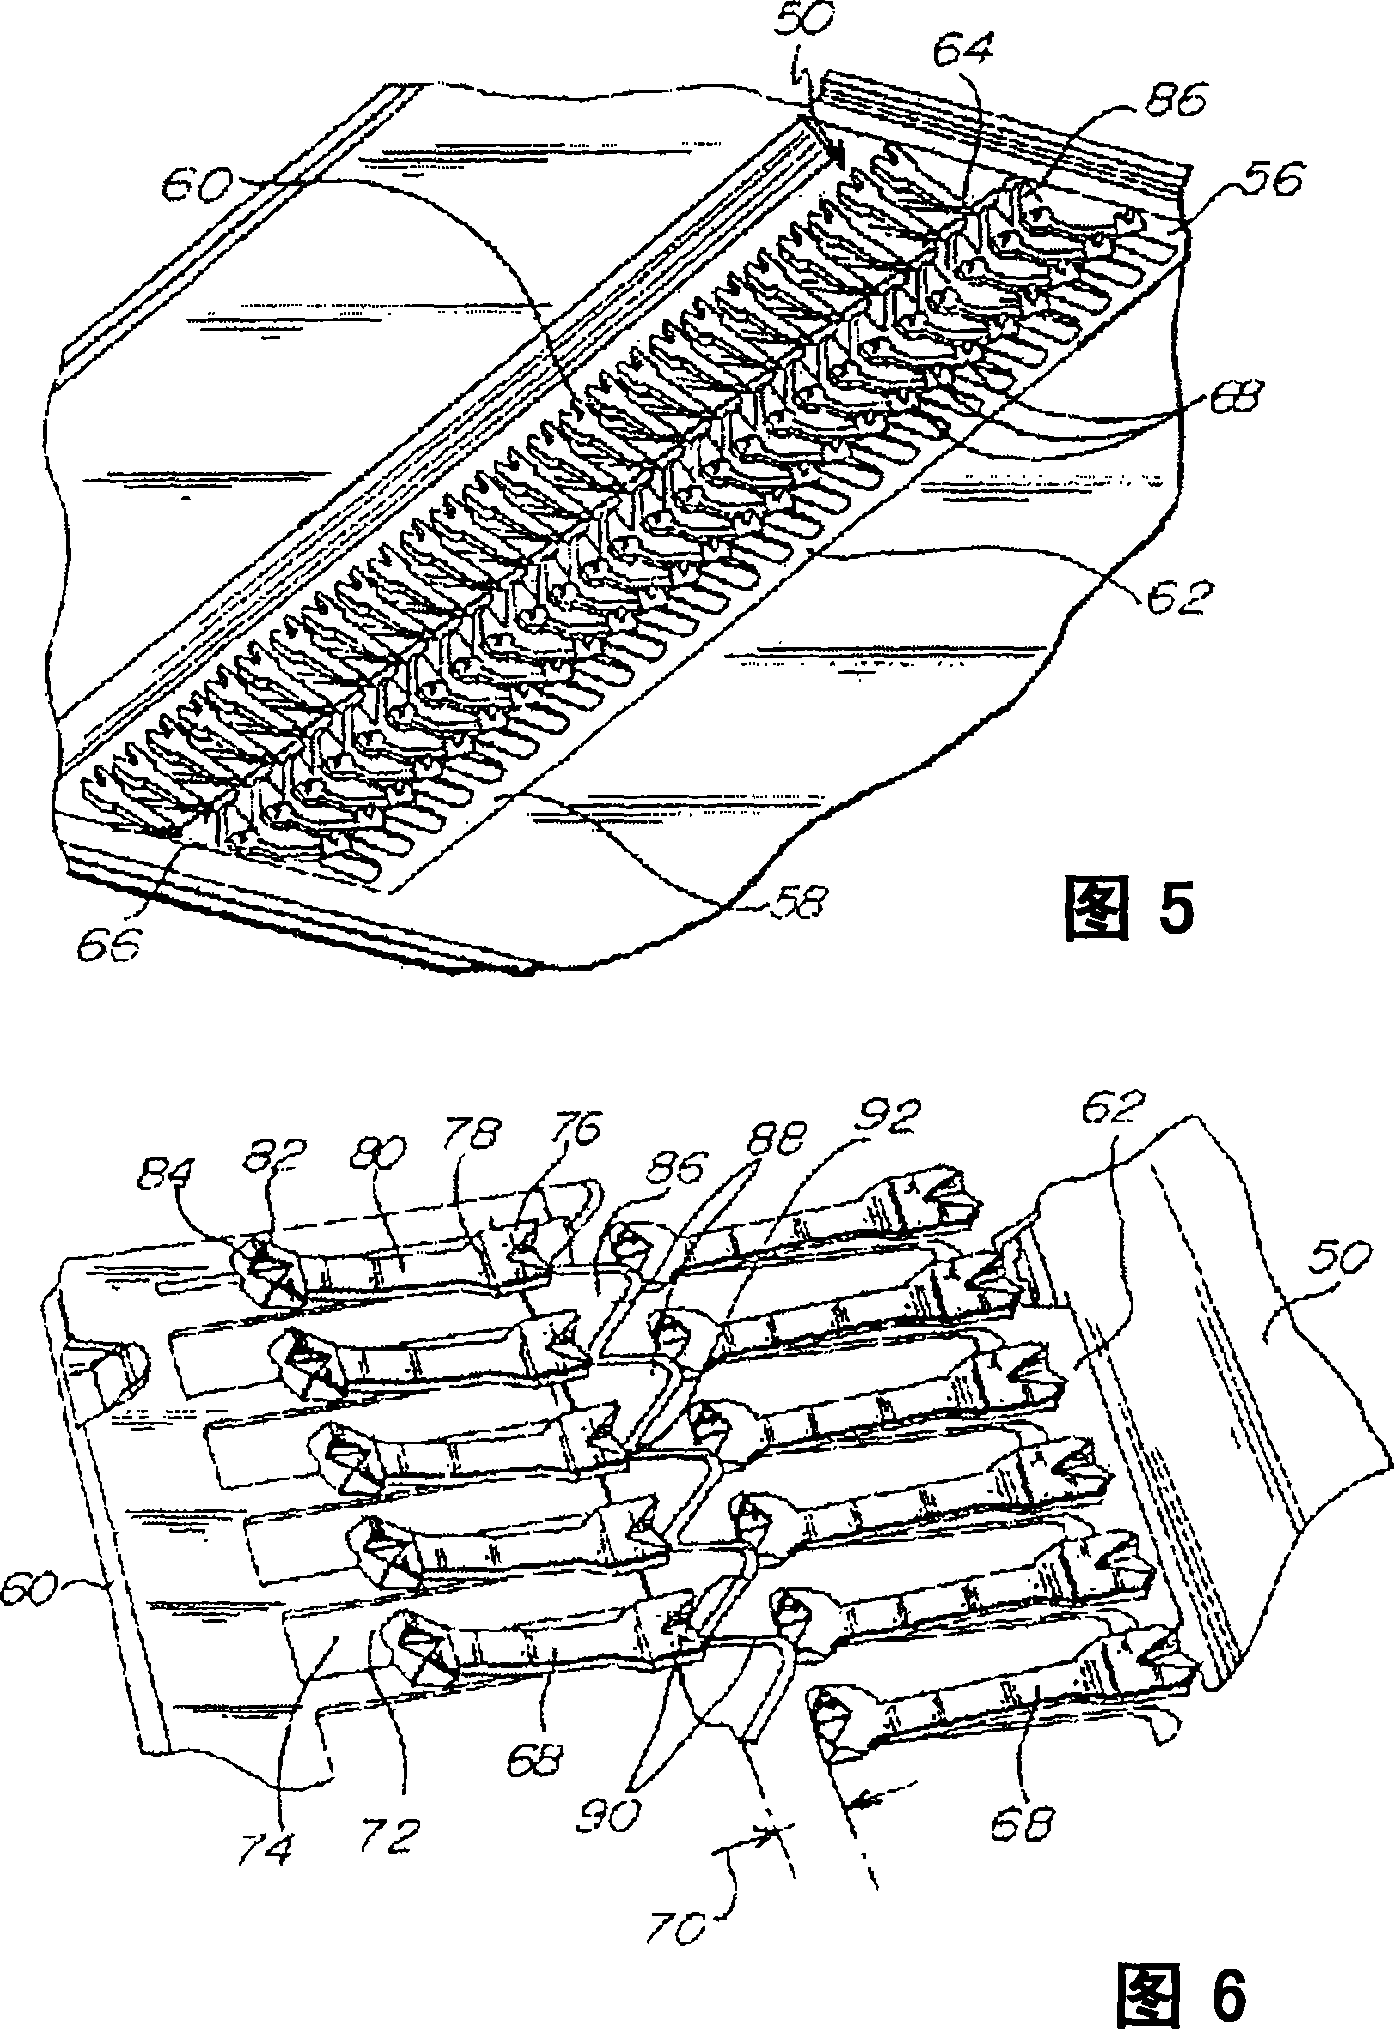 Wafer container with secondary wafer restraint system